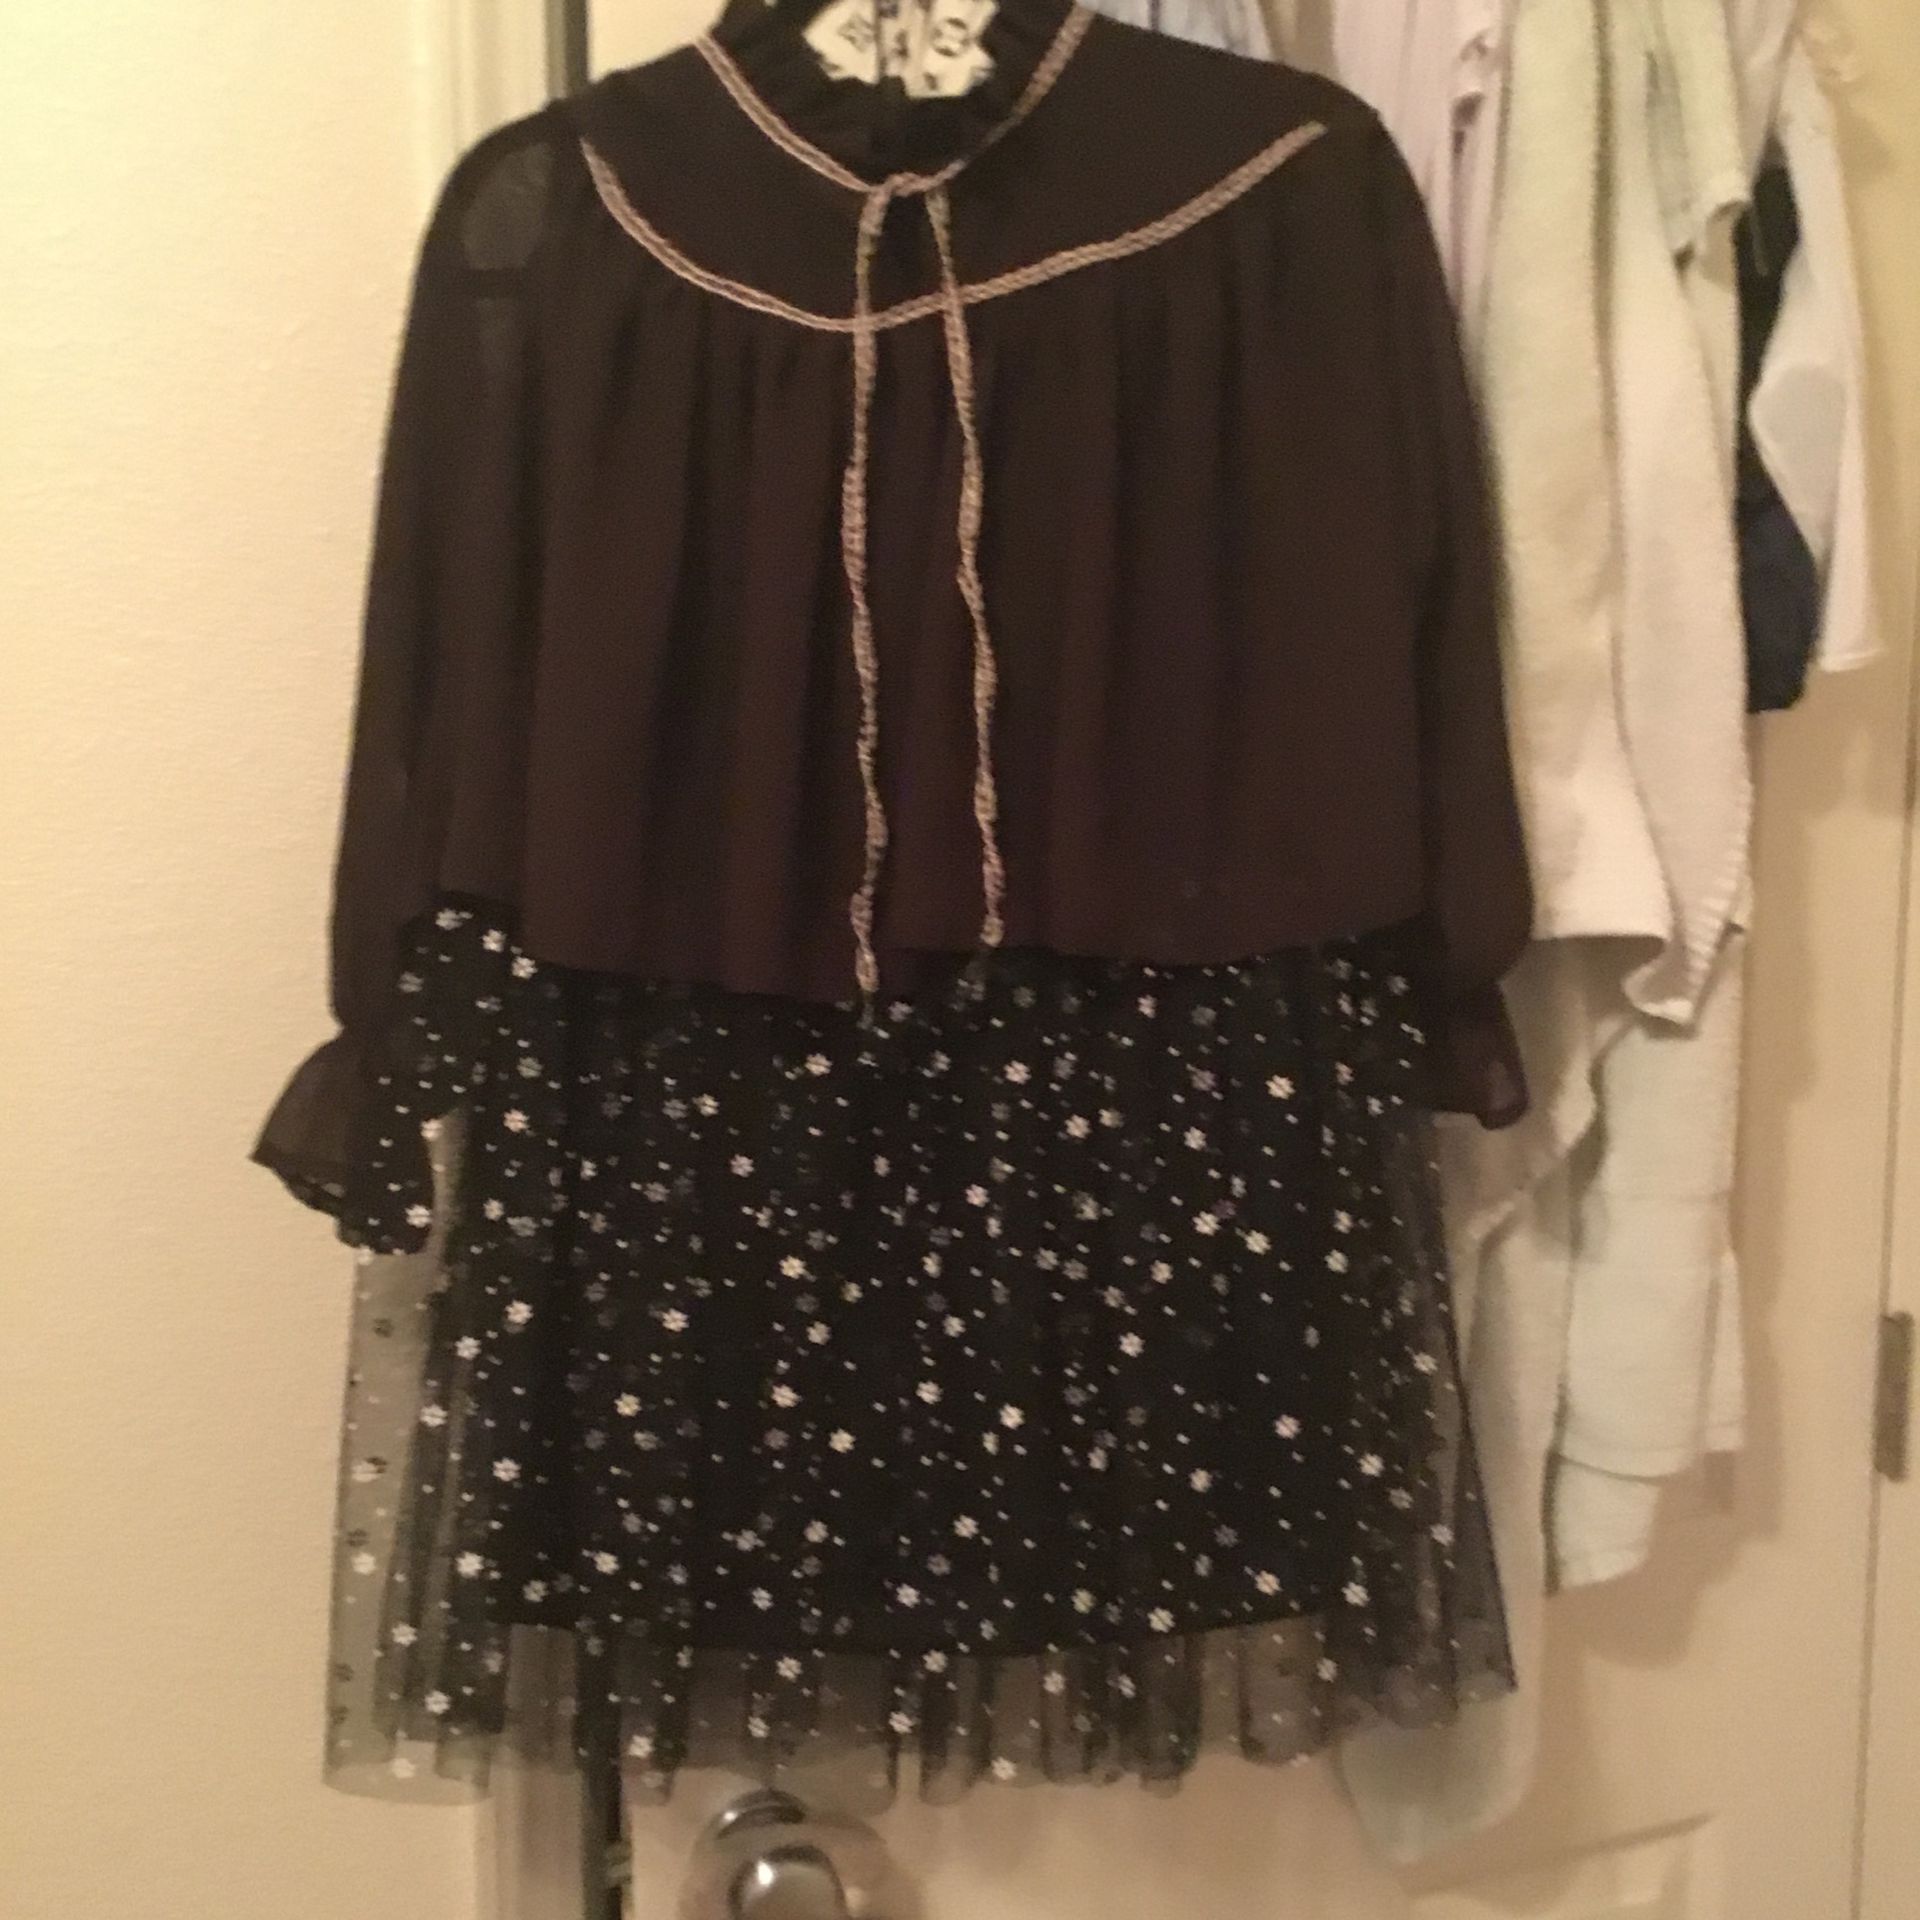 Dark Brown Top Attached With Black Skirt With Flowers Pink Lace